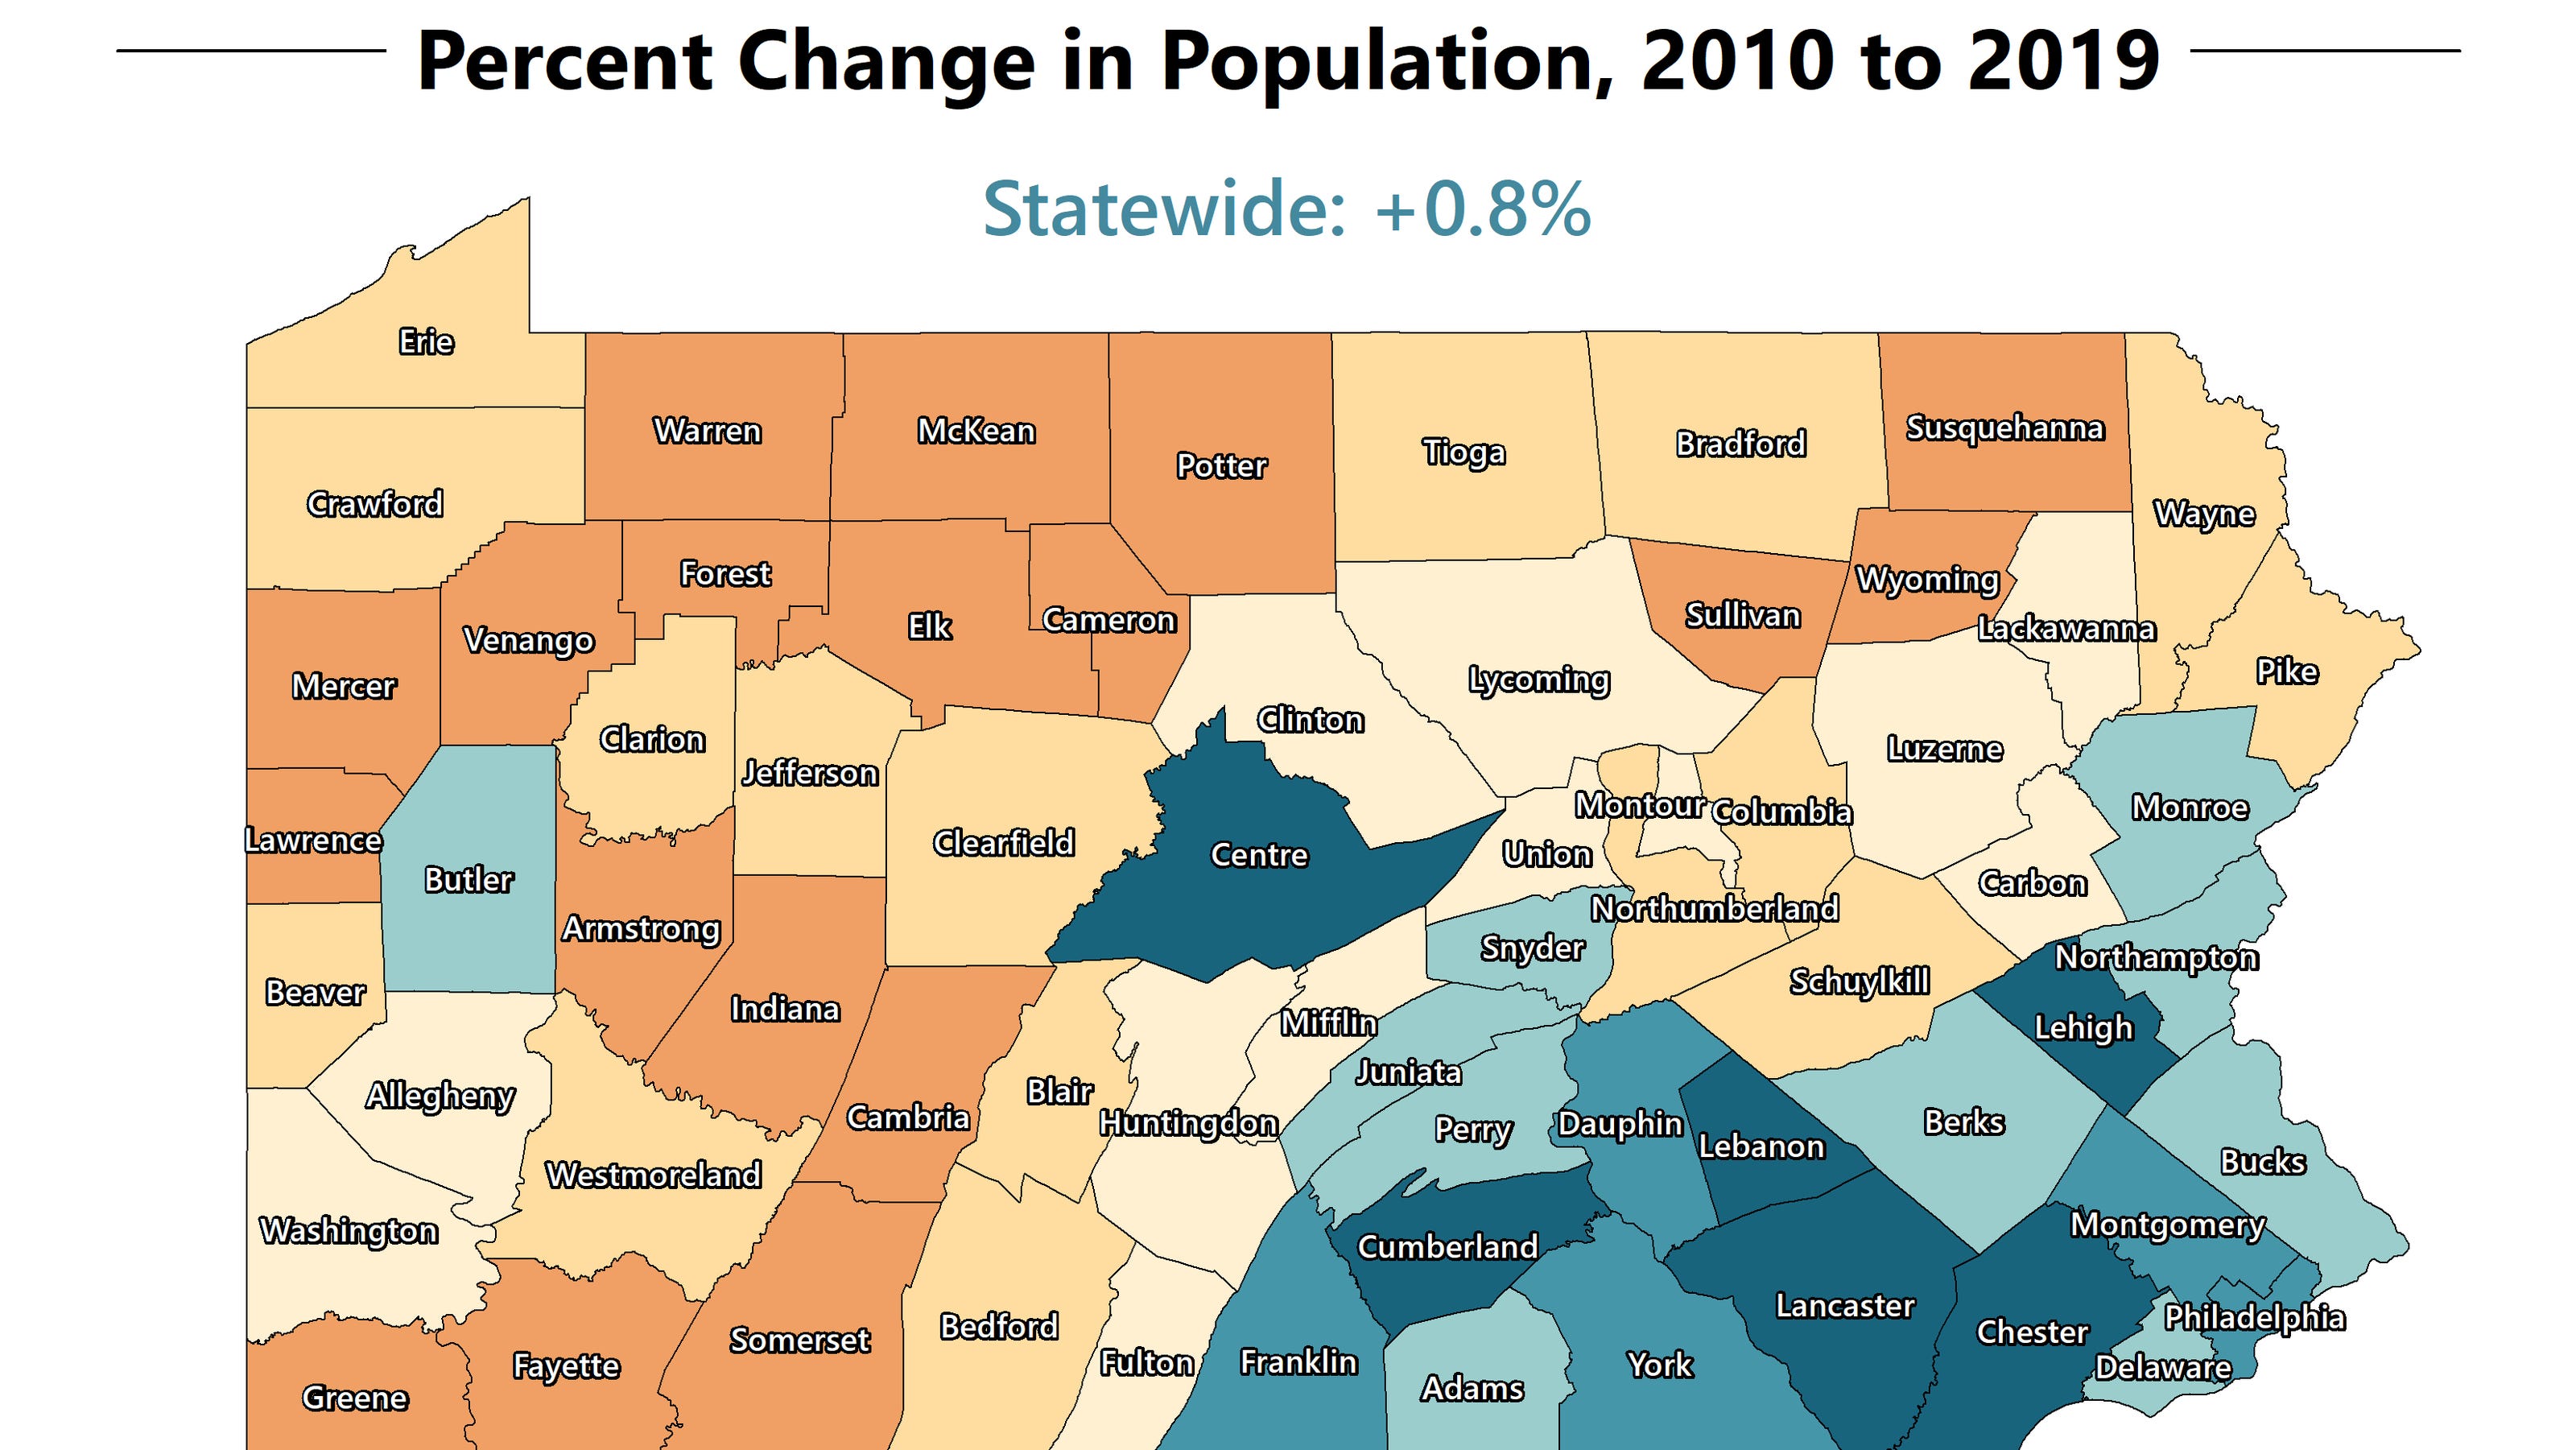 U.S. Census Central Pennsylvania's growth outpaces the state